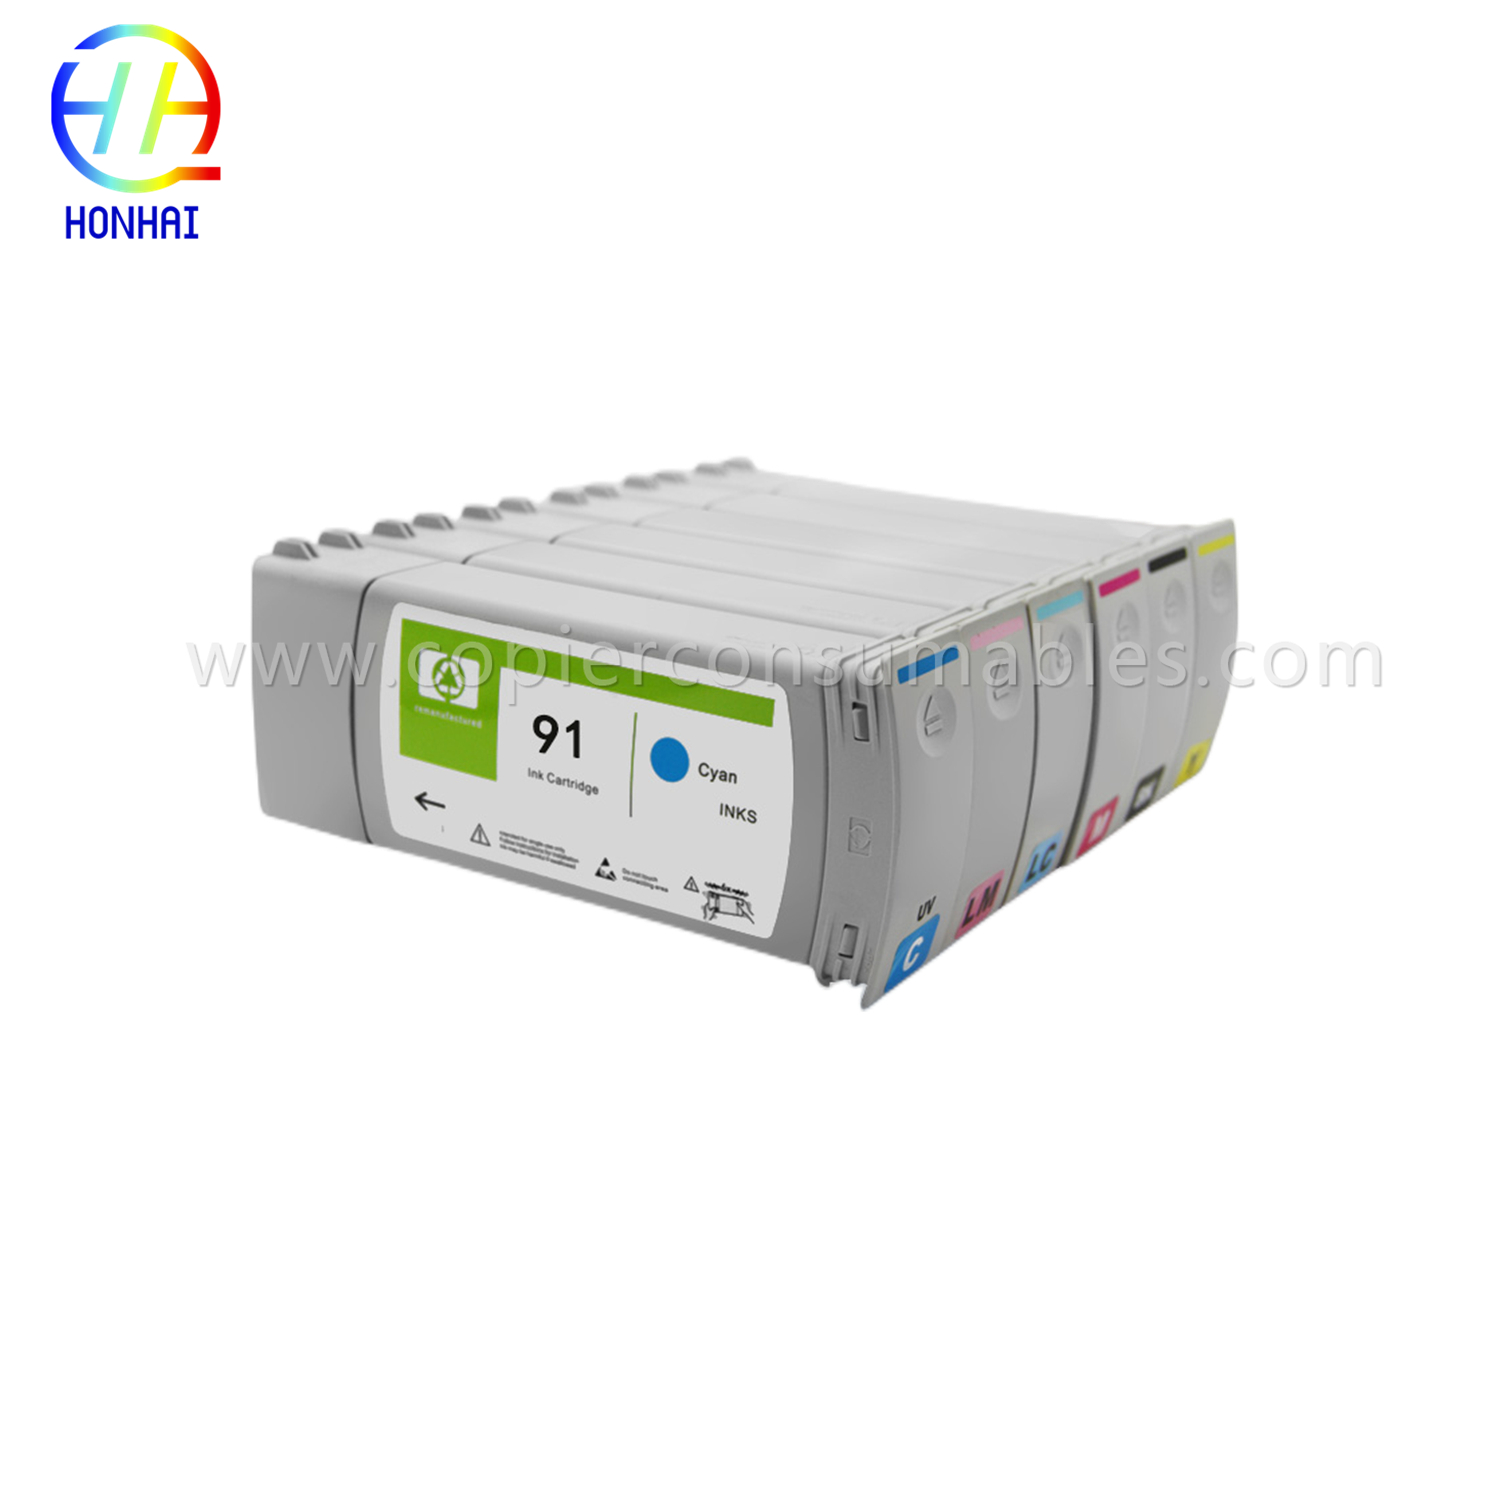 New Genuine Ink Cartridge for HP Designjet Z6100 (91 C9464A C9469A C9471 C9518) (2)